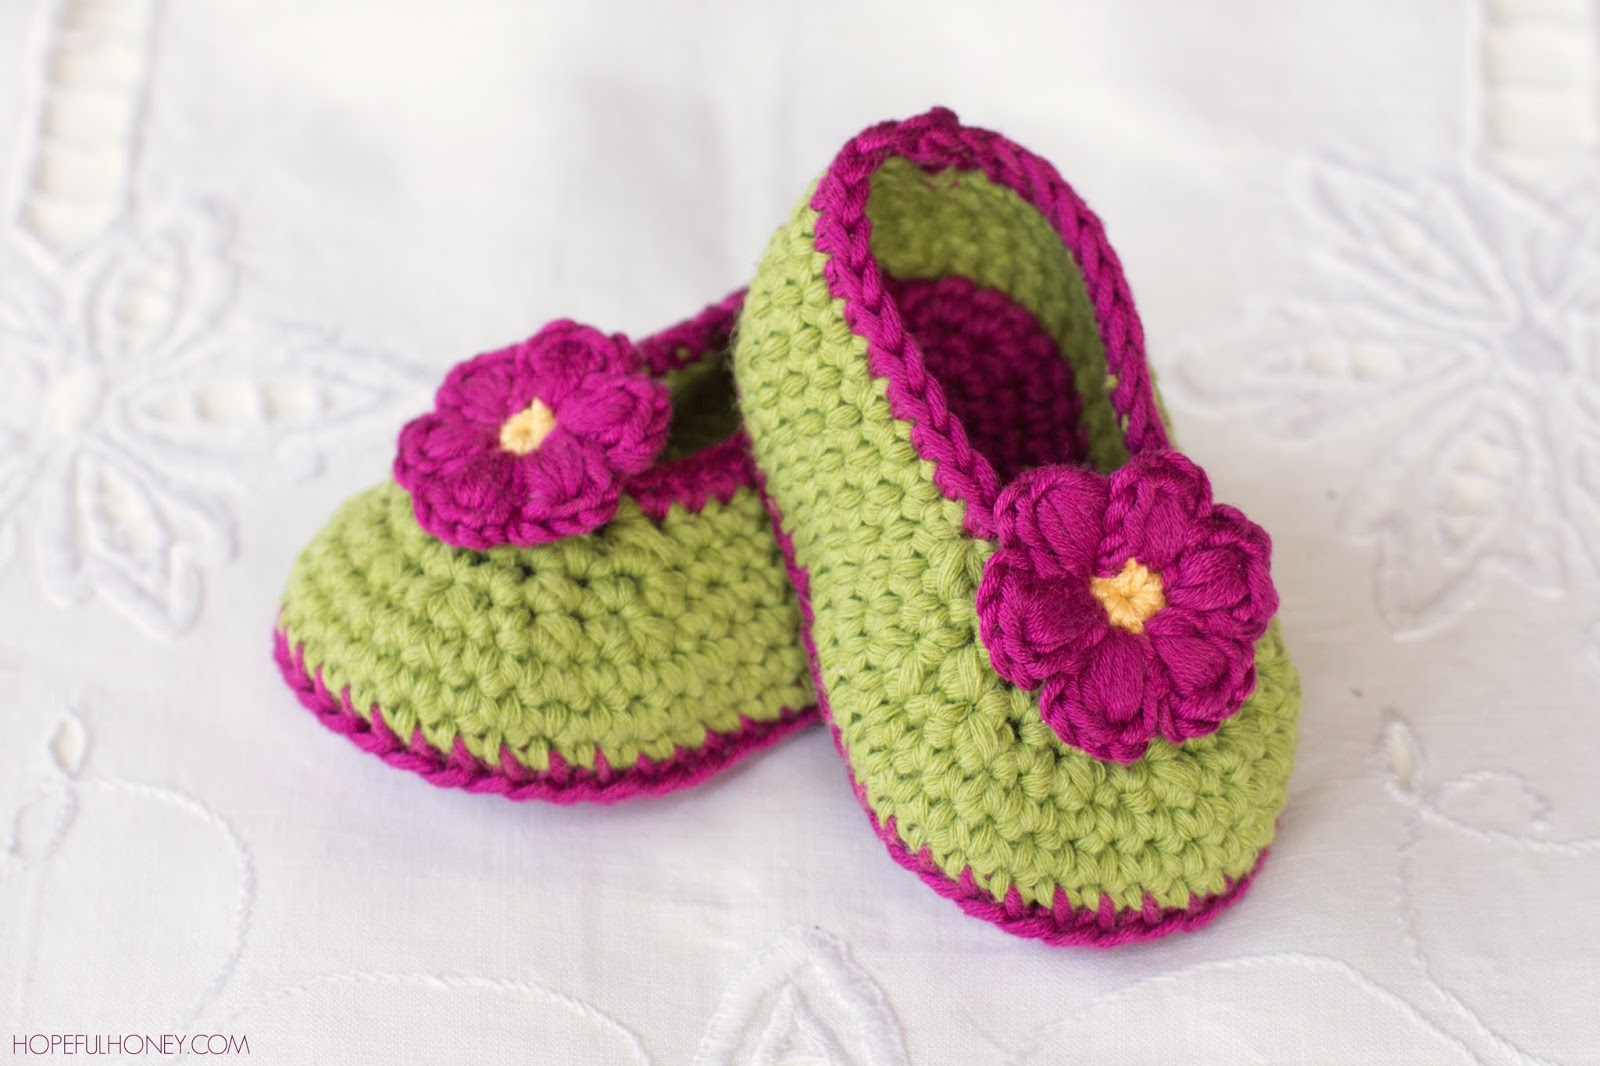 Knit Booties Pattern Free Easy To Make Crochet Booties Crochet And Knitting Patterns 2019